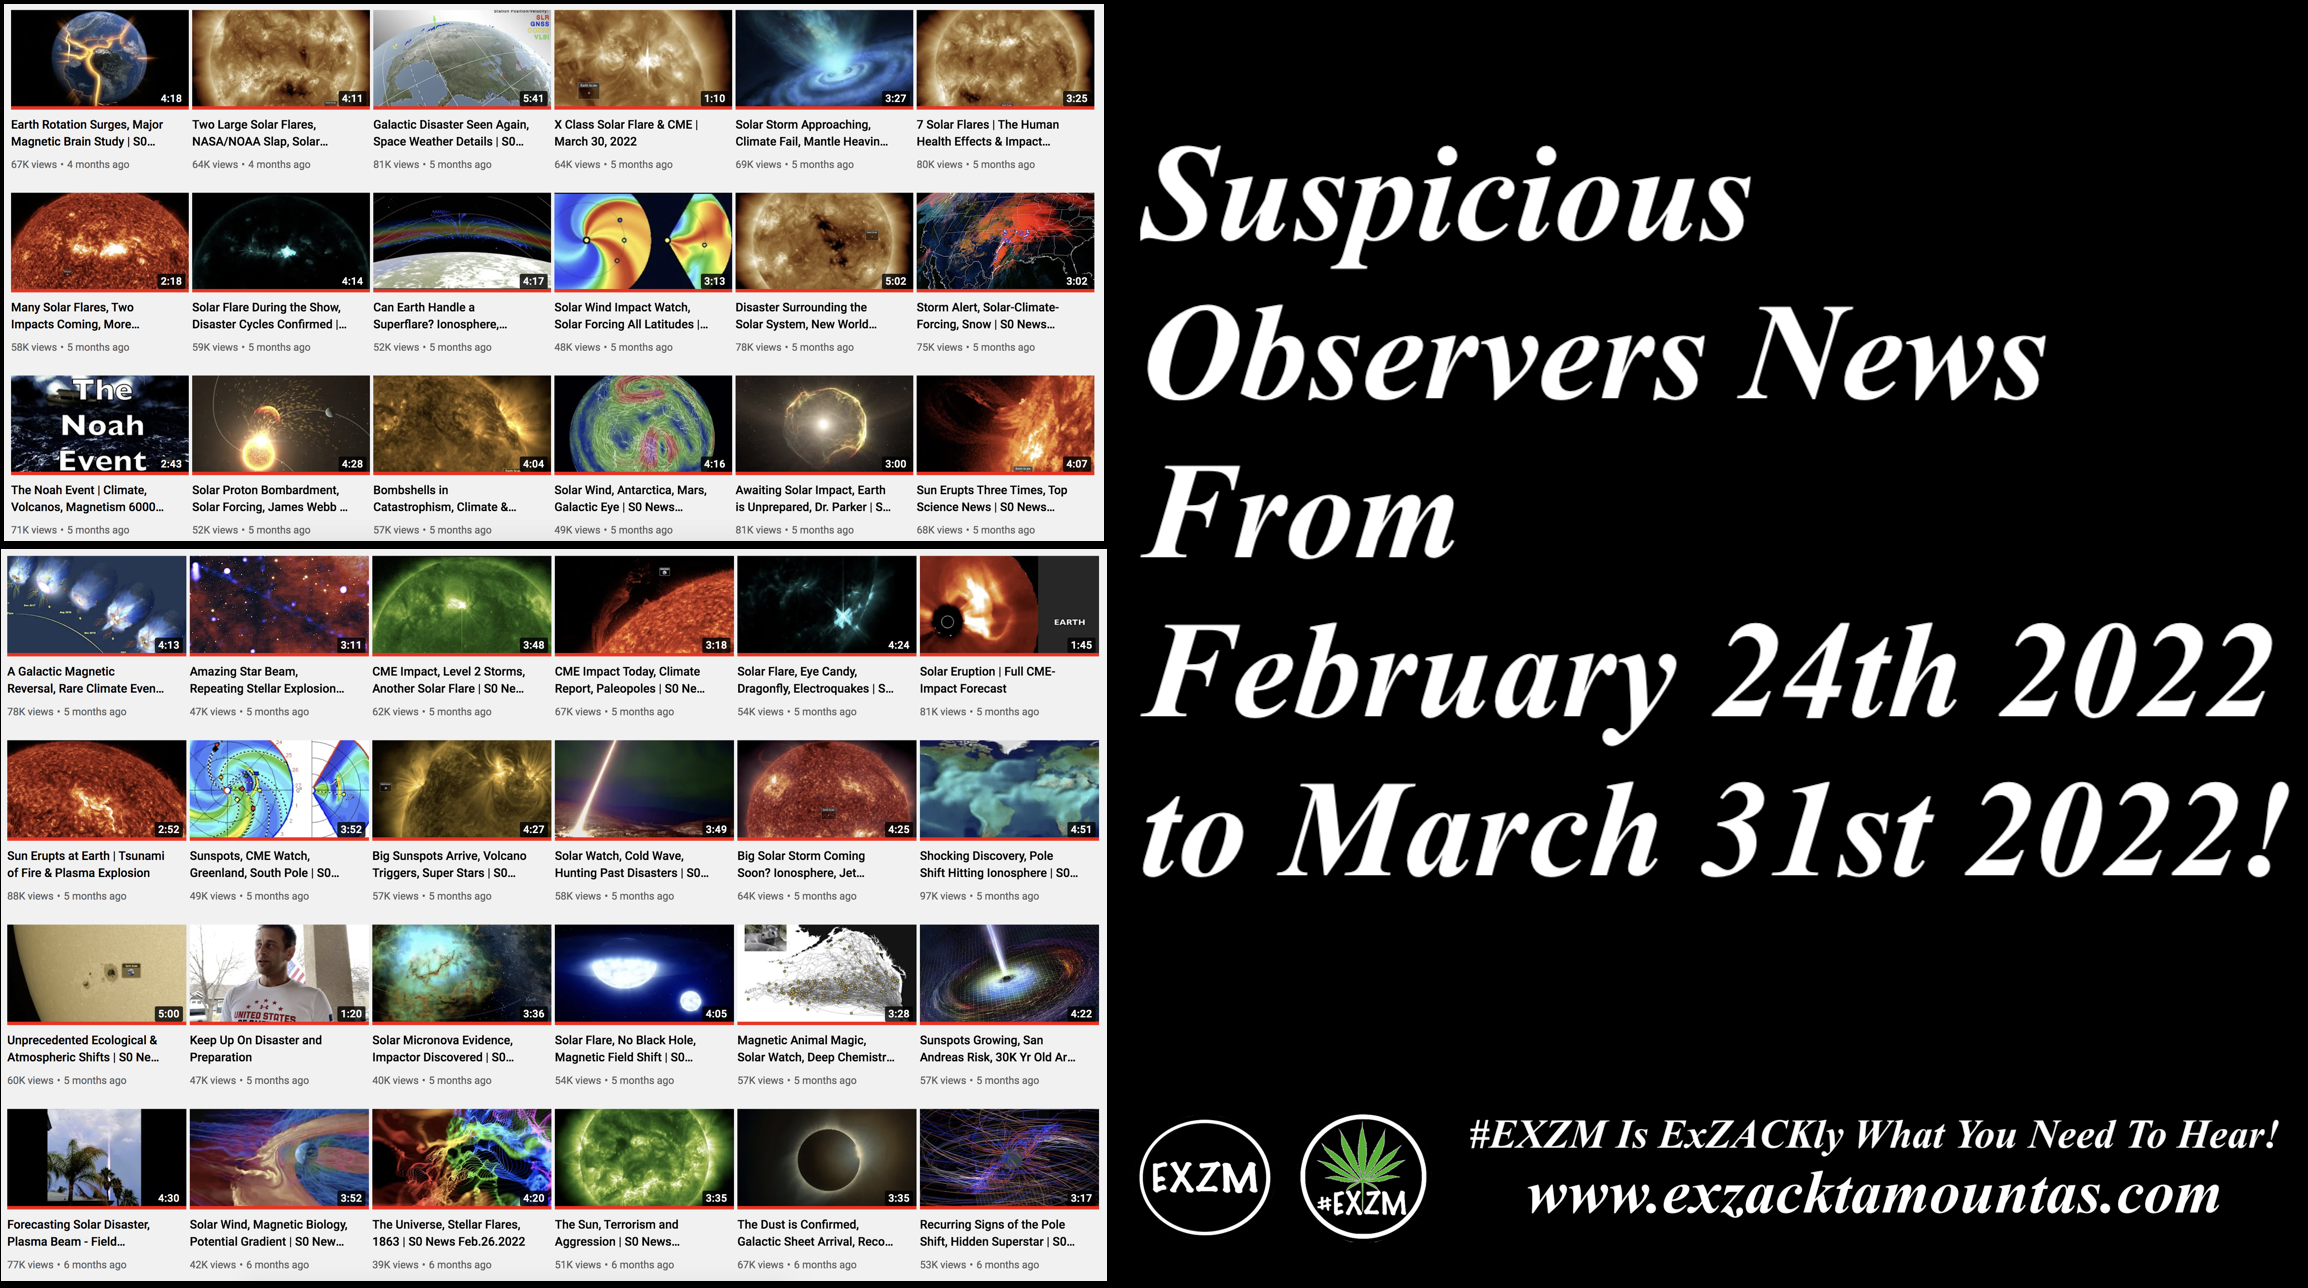 Suspicious Observers News From February 24th 2022 to March 31st 2022 The Great Reset Alex Jones Infowars EXZM exZACKtaMOUNTas Zack Mount August 31st 2022